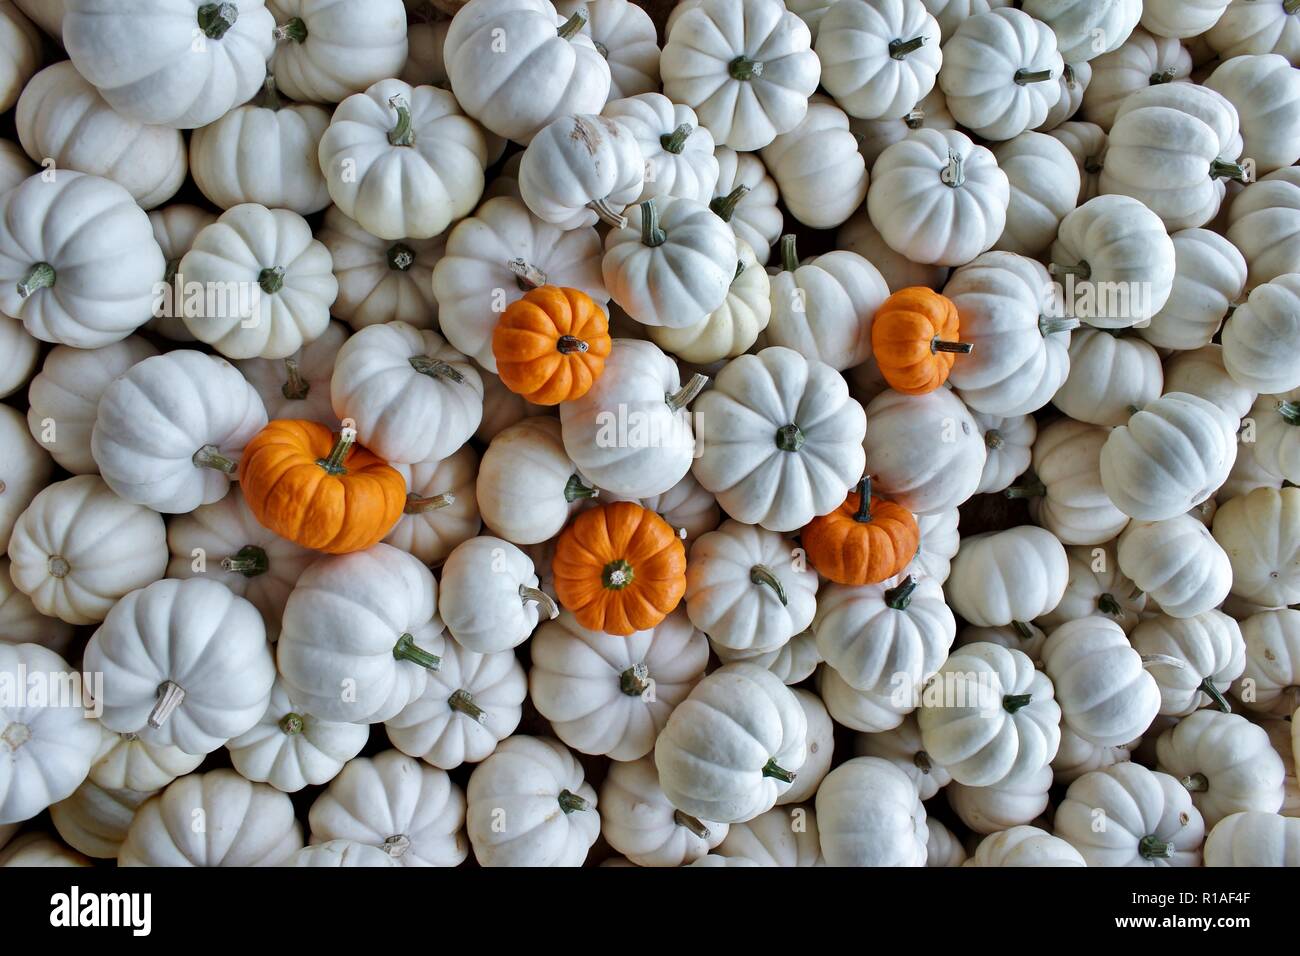 Collection of Small White Pumpkins with Small Orange Pumpkins Scattered Around. Stock Photo